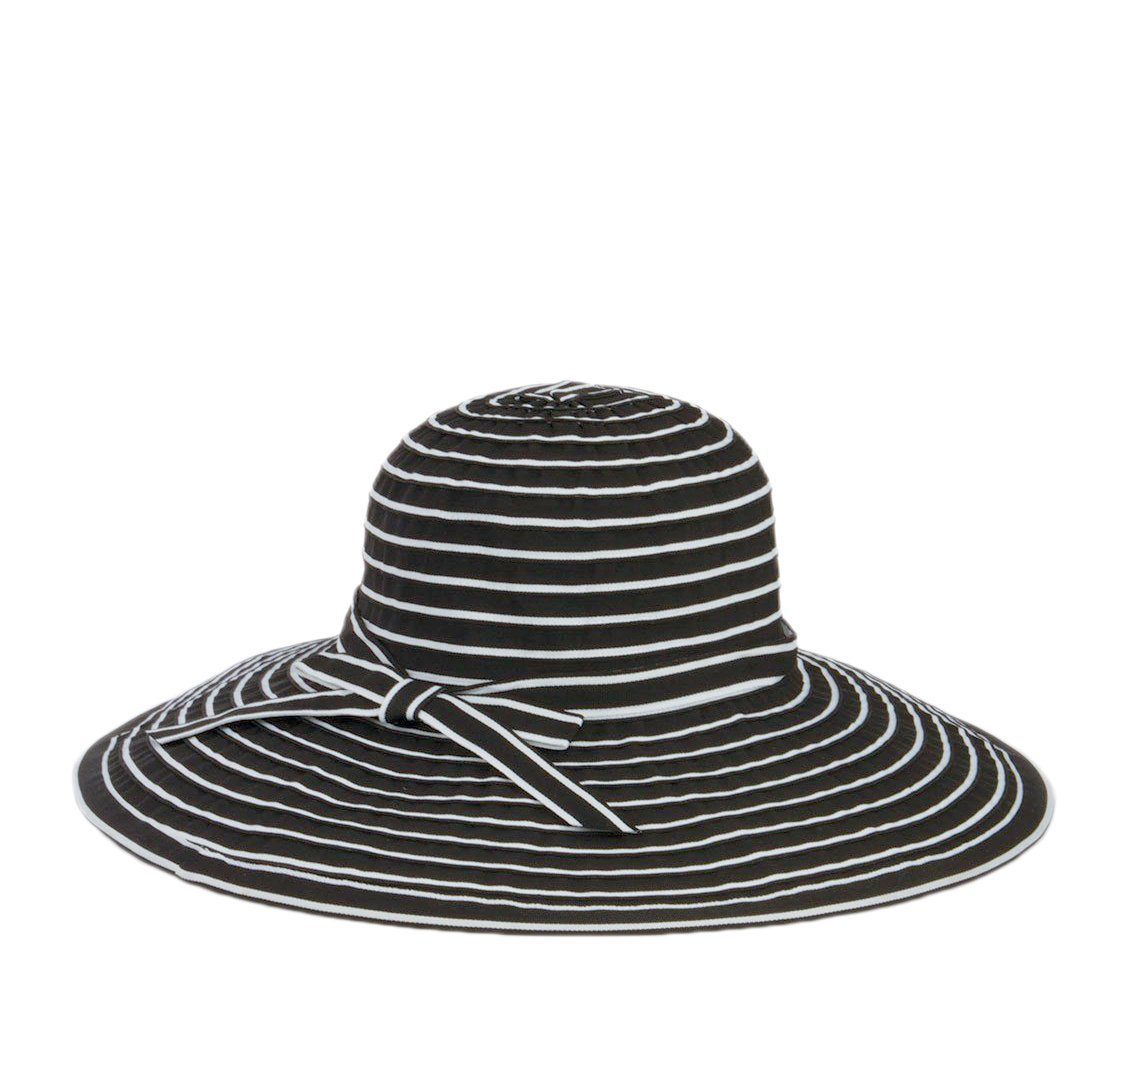 Hats - Women's Ribbon Braided Large Brim Hat With A Bow